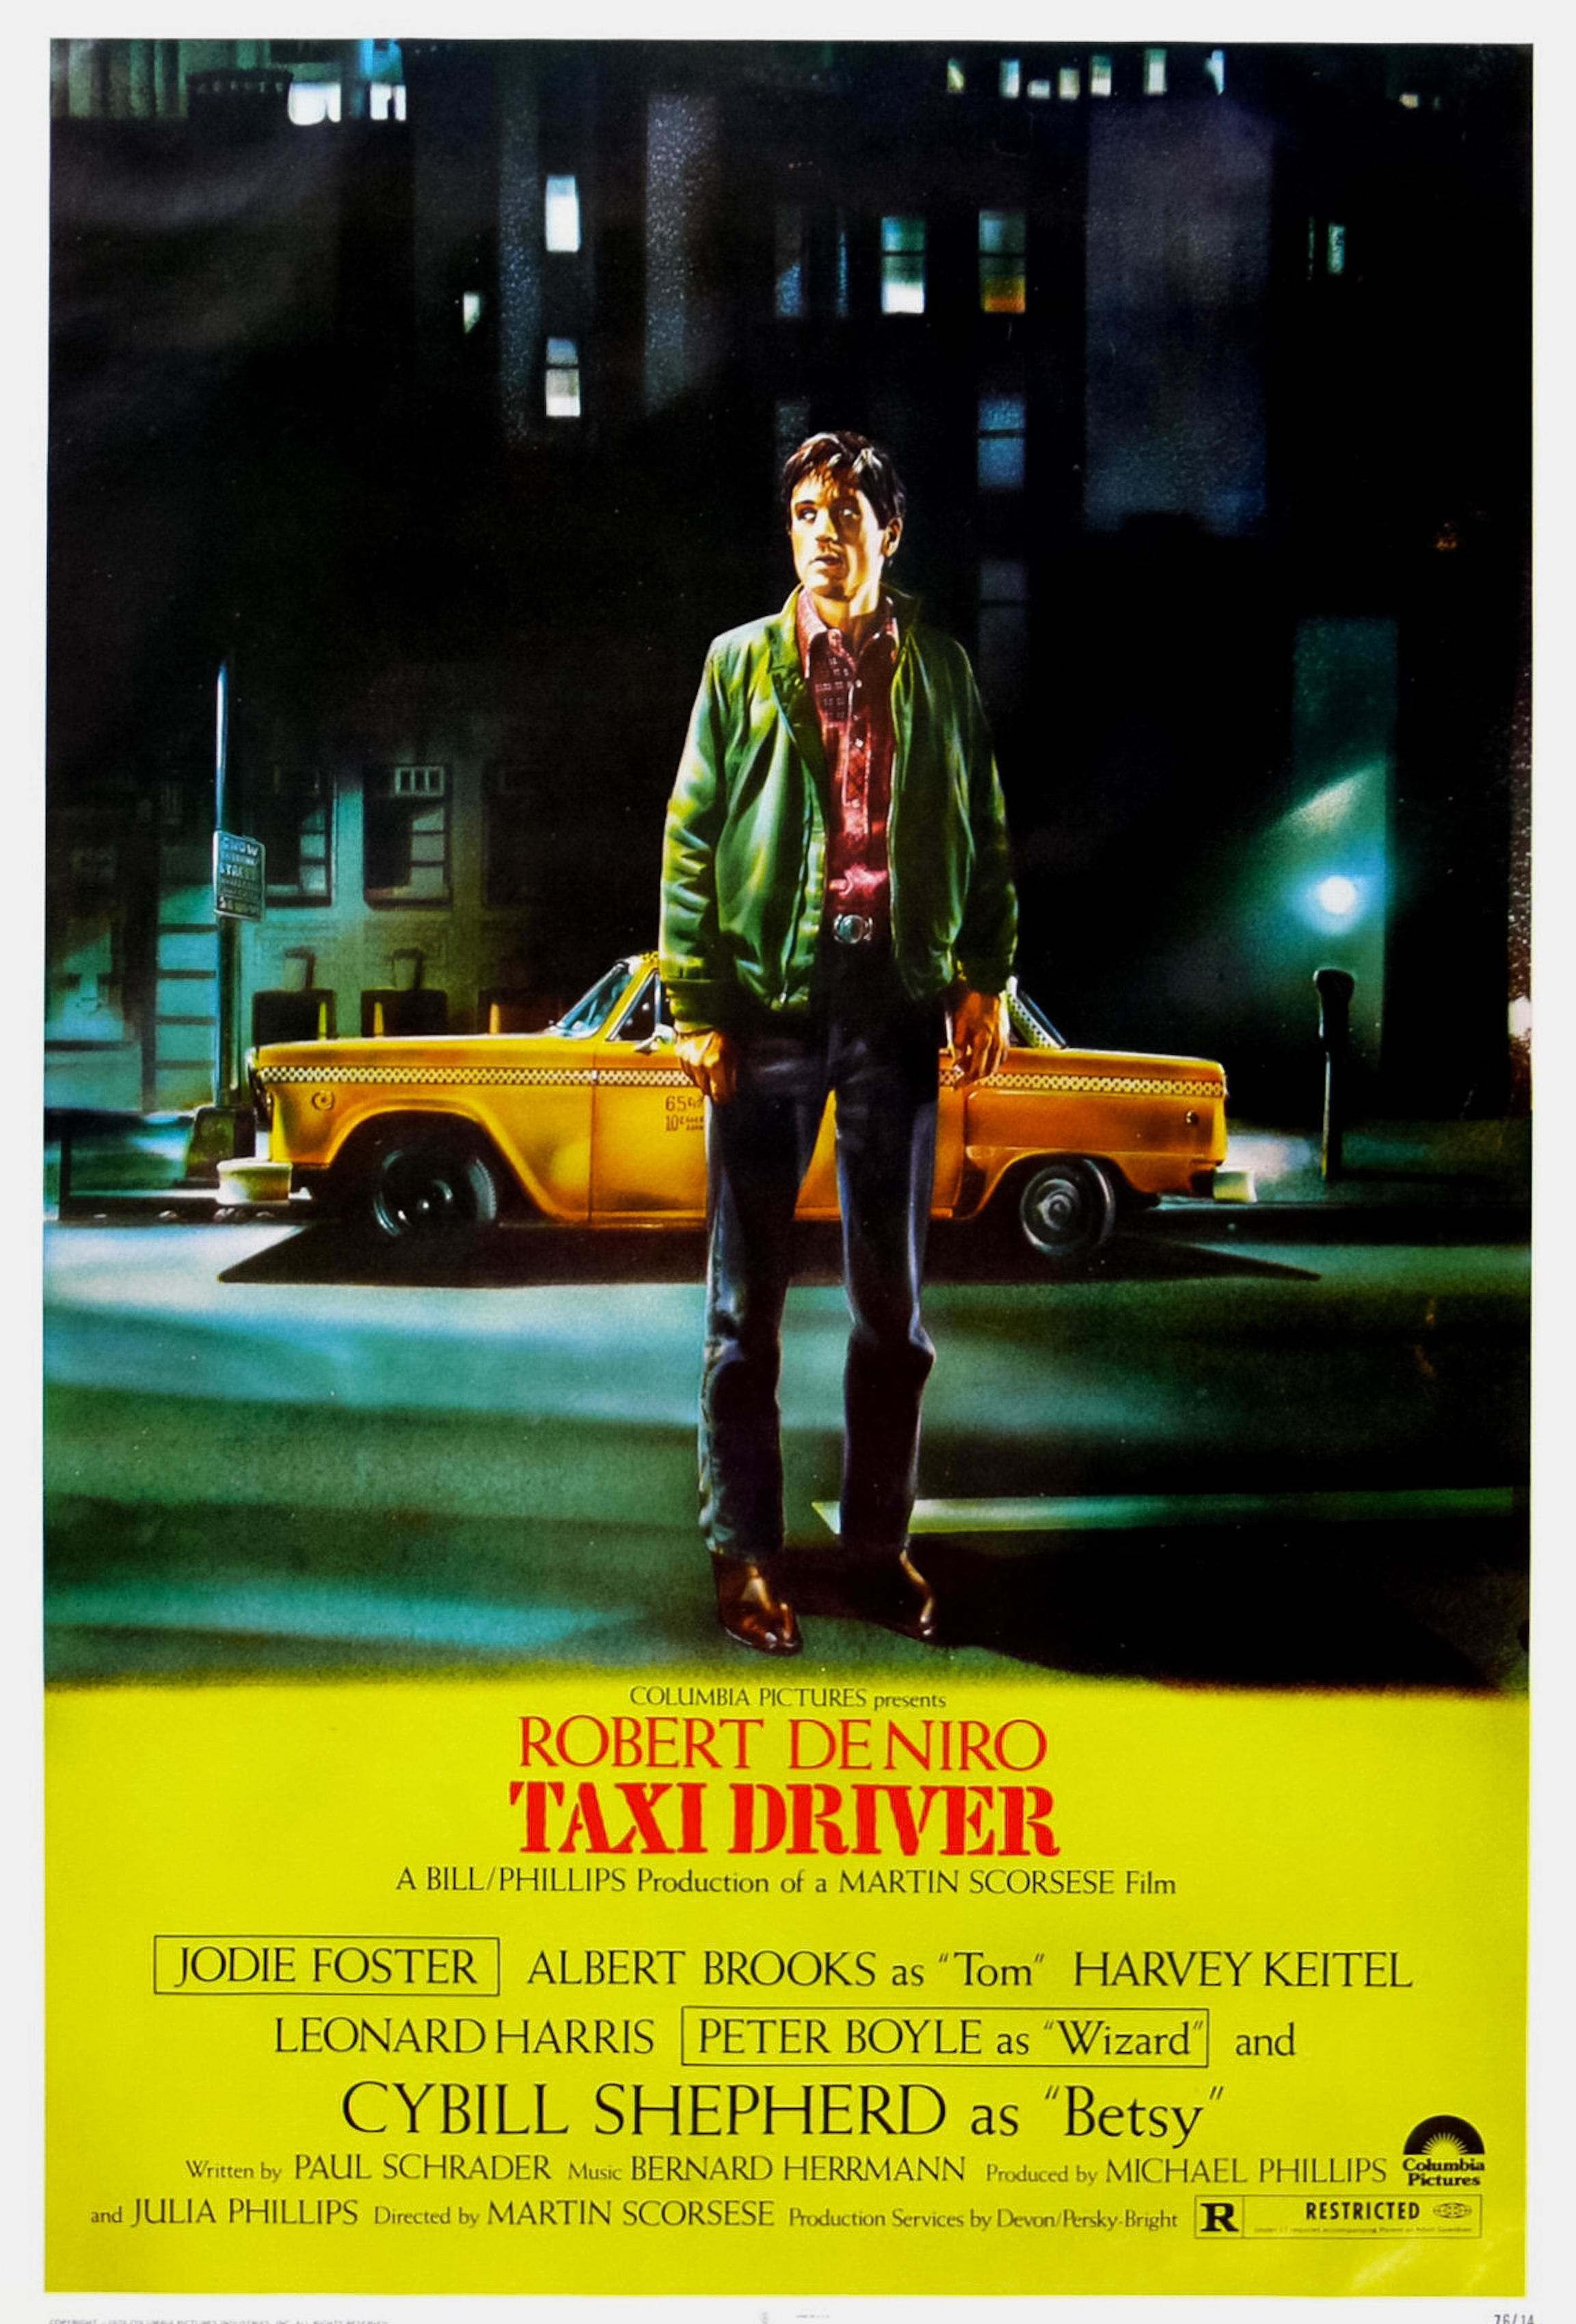 Robert DeNiro as Travis Bickle stands alone in the center of the Taxi Driver poster.